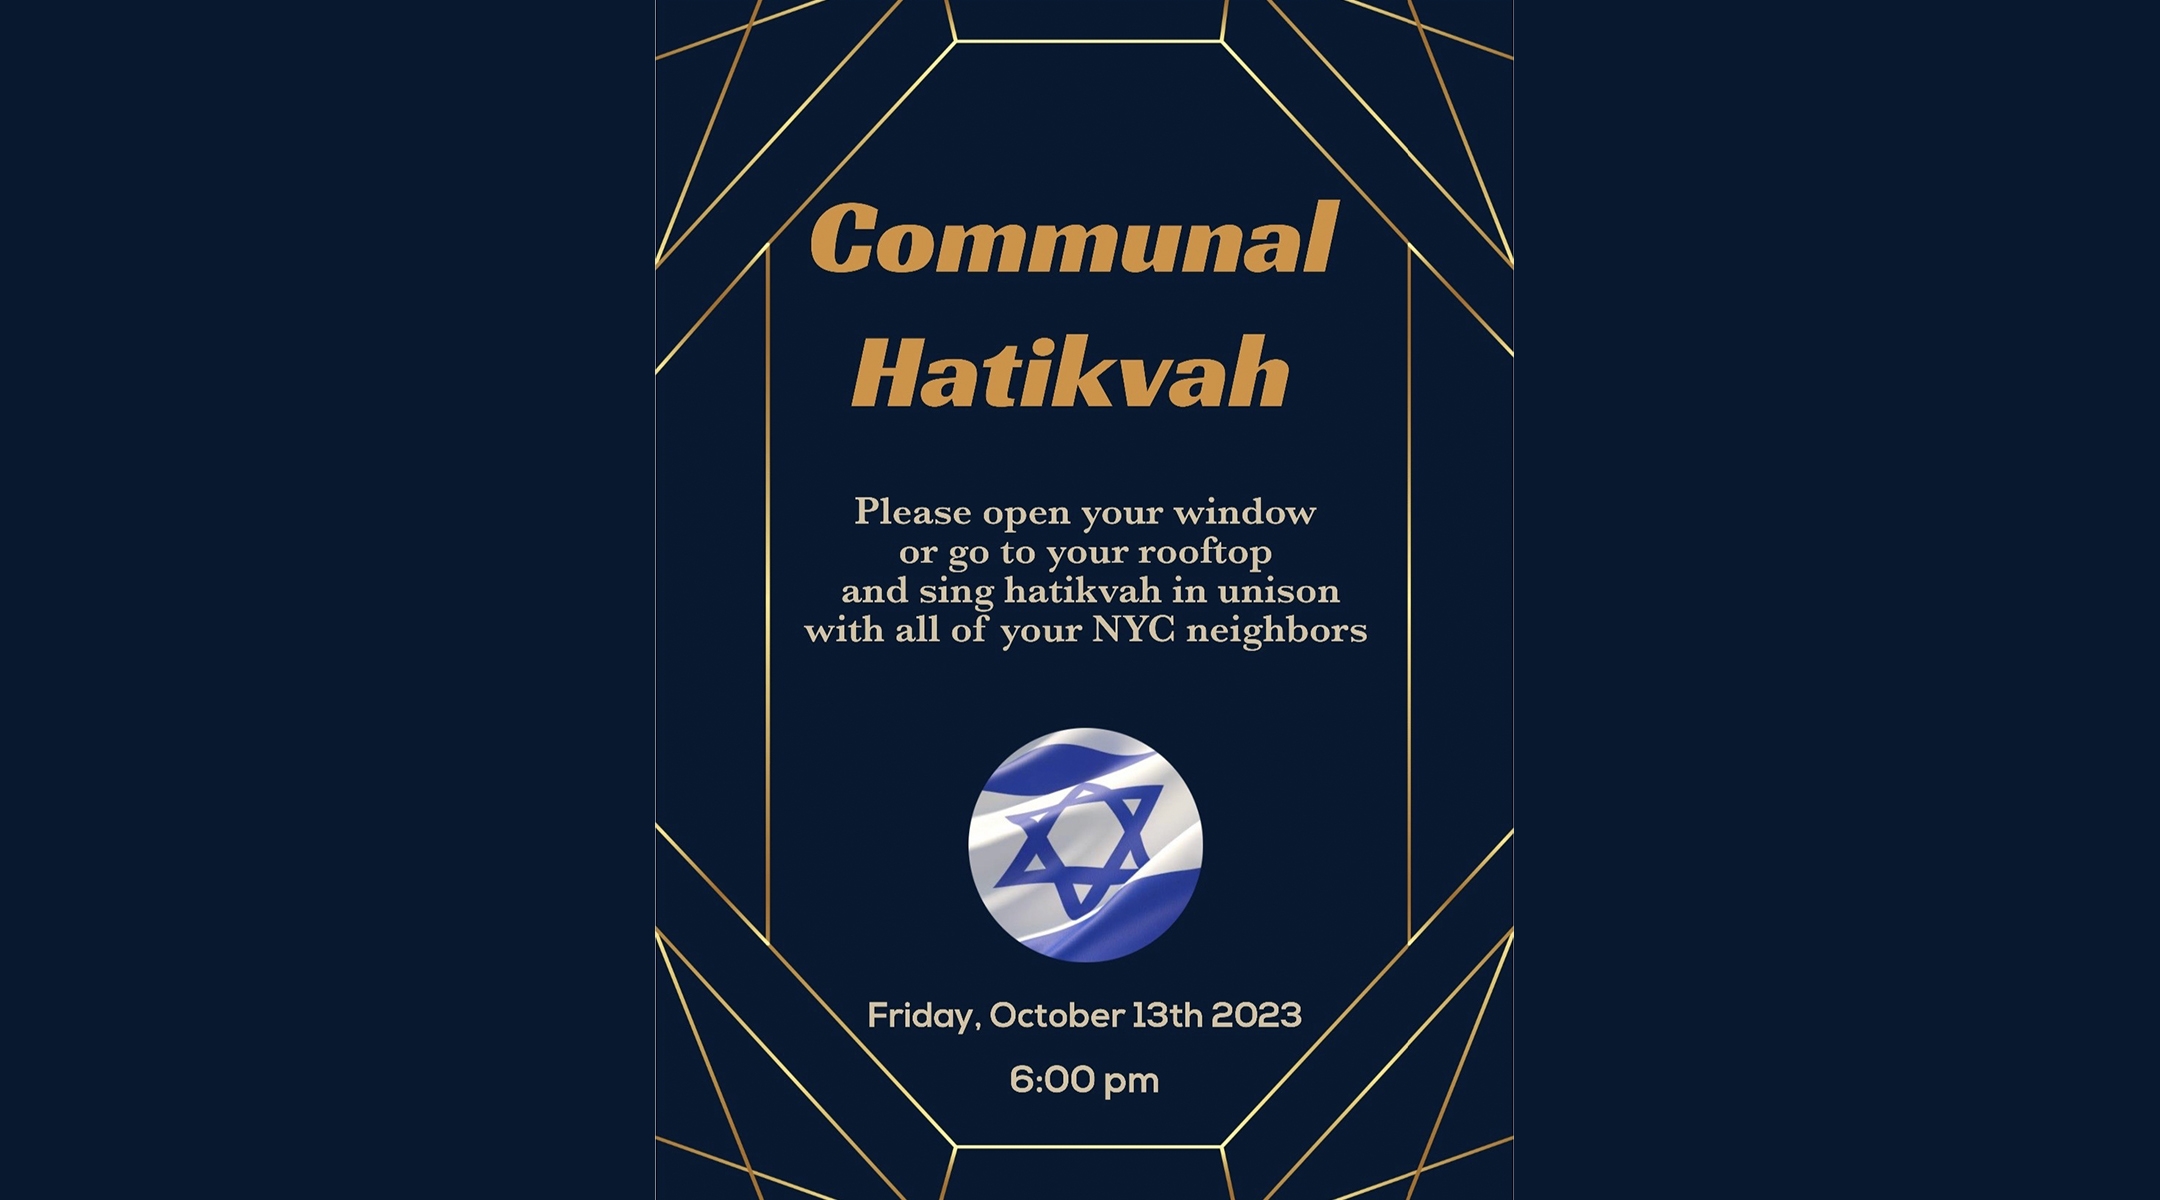 The flier invites New Yorkers to sing Hatikvah from their balconies on Friday evening at 6 p.m. (Julia Gergely)